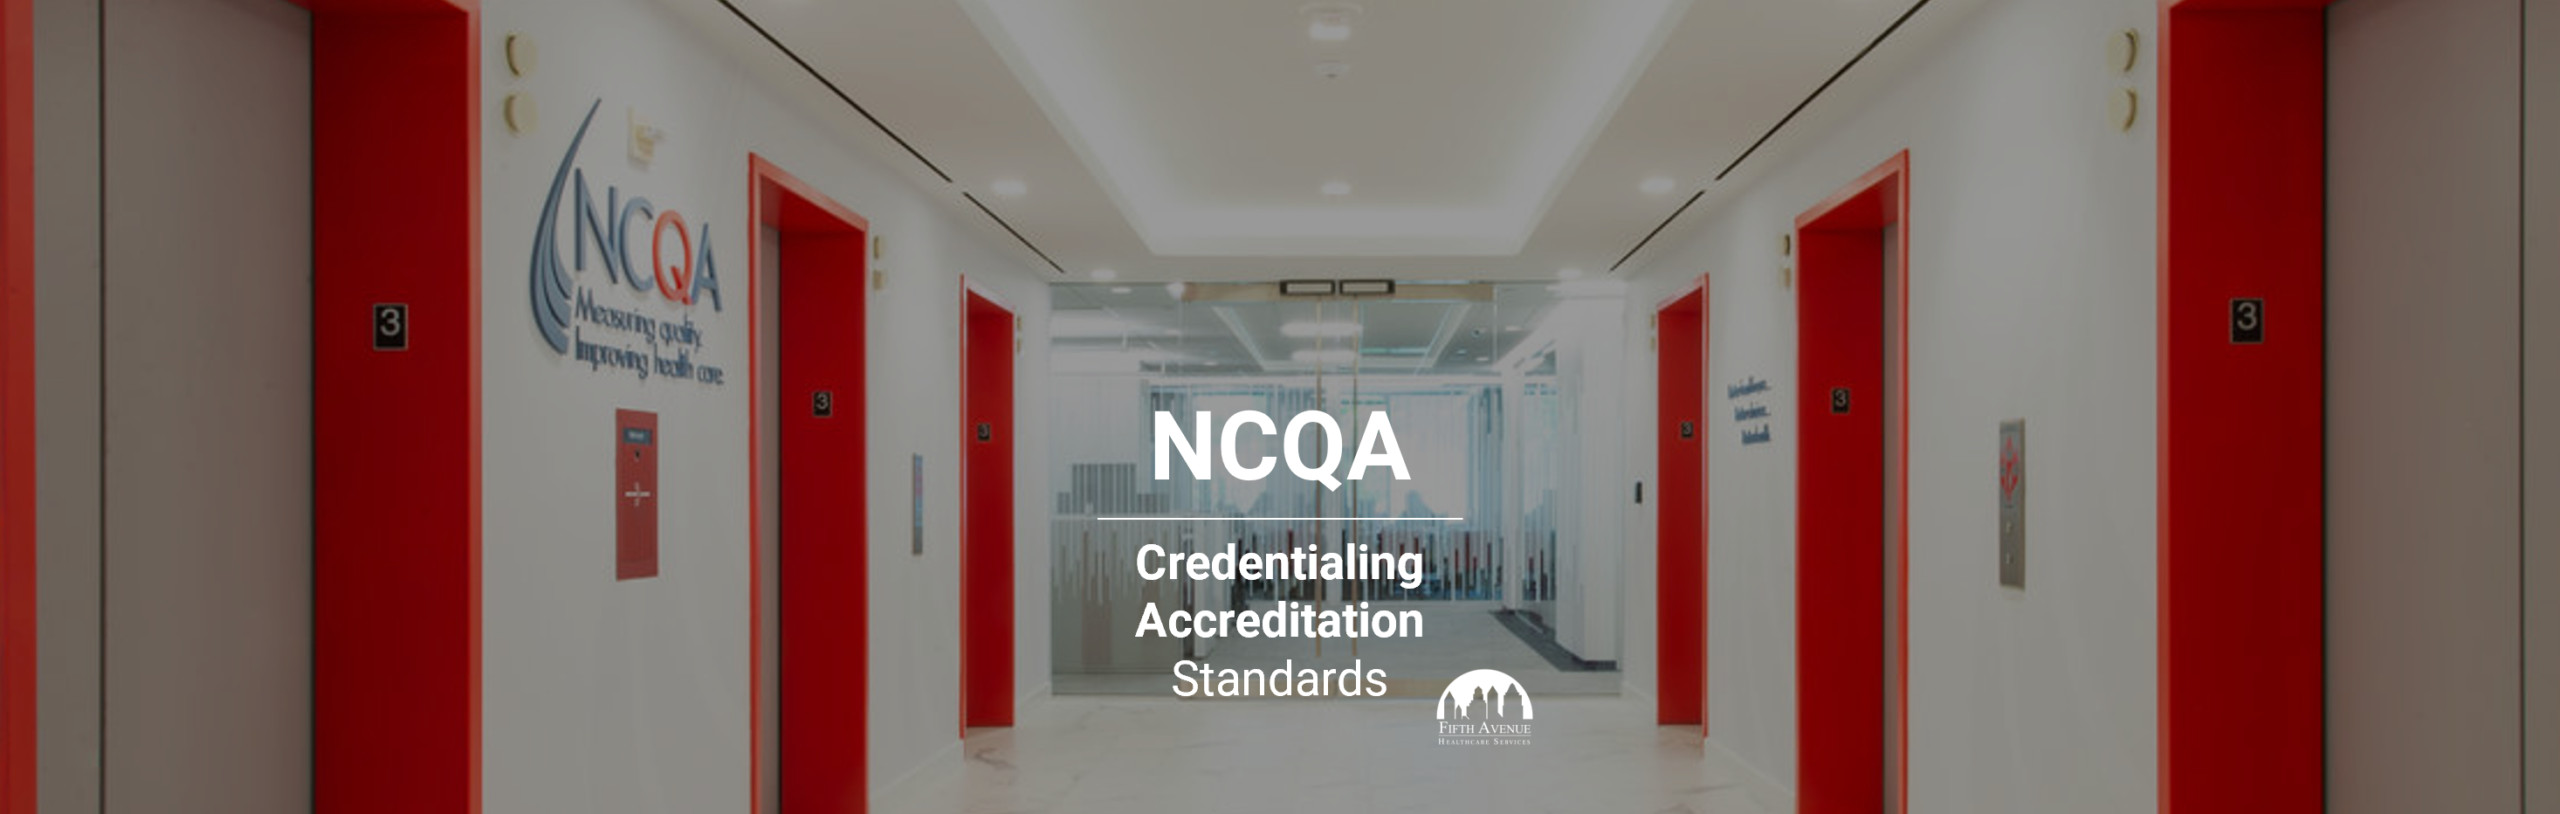 FifthAvenueHealthcareServices.com 2022 NCQA Credentialing Accreditation Standards